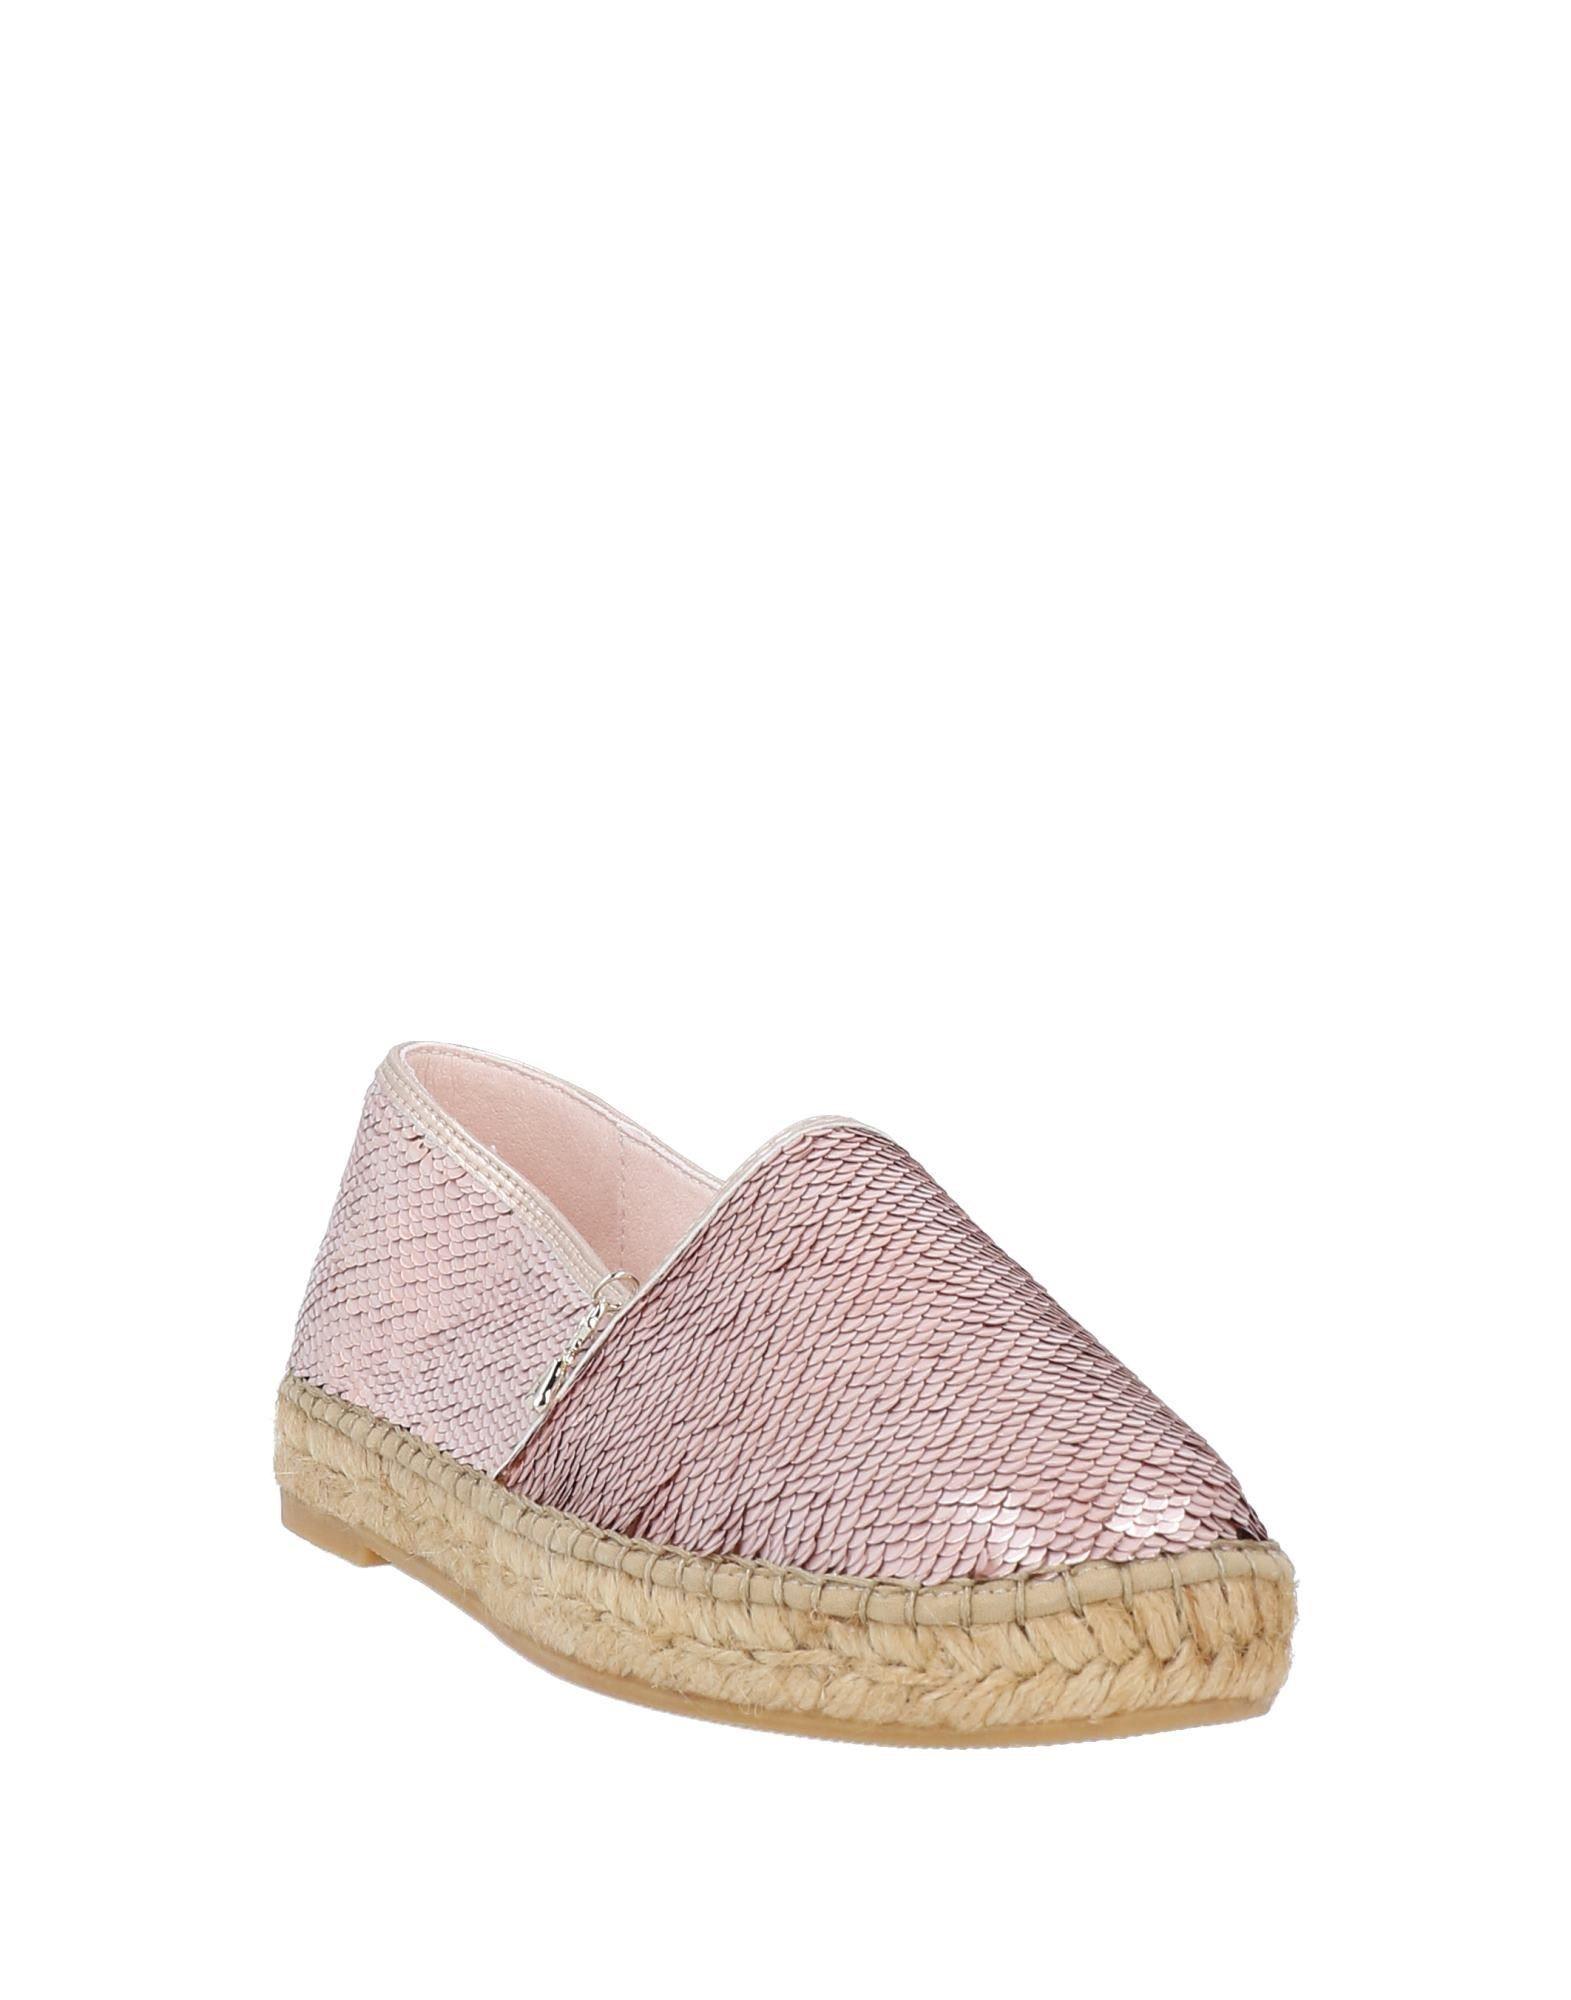 Patrizia Pepe Rubber Espadrilles in Rose Gold (Pink) | Lyst